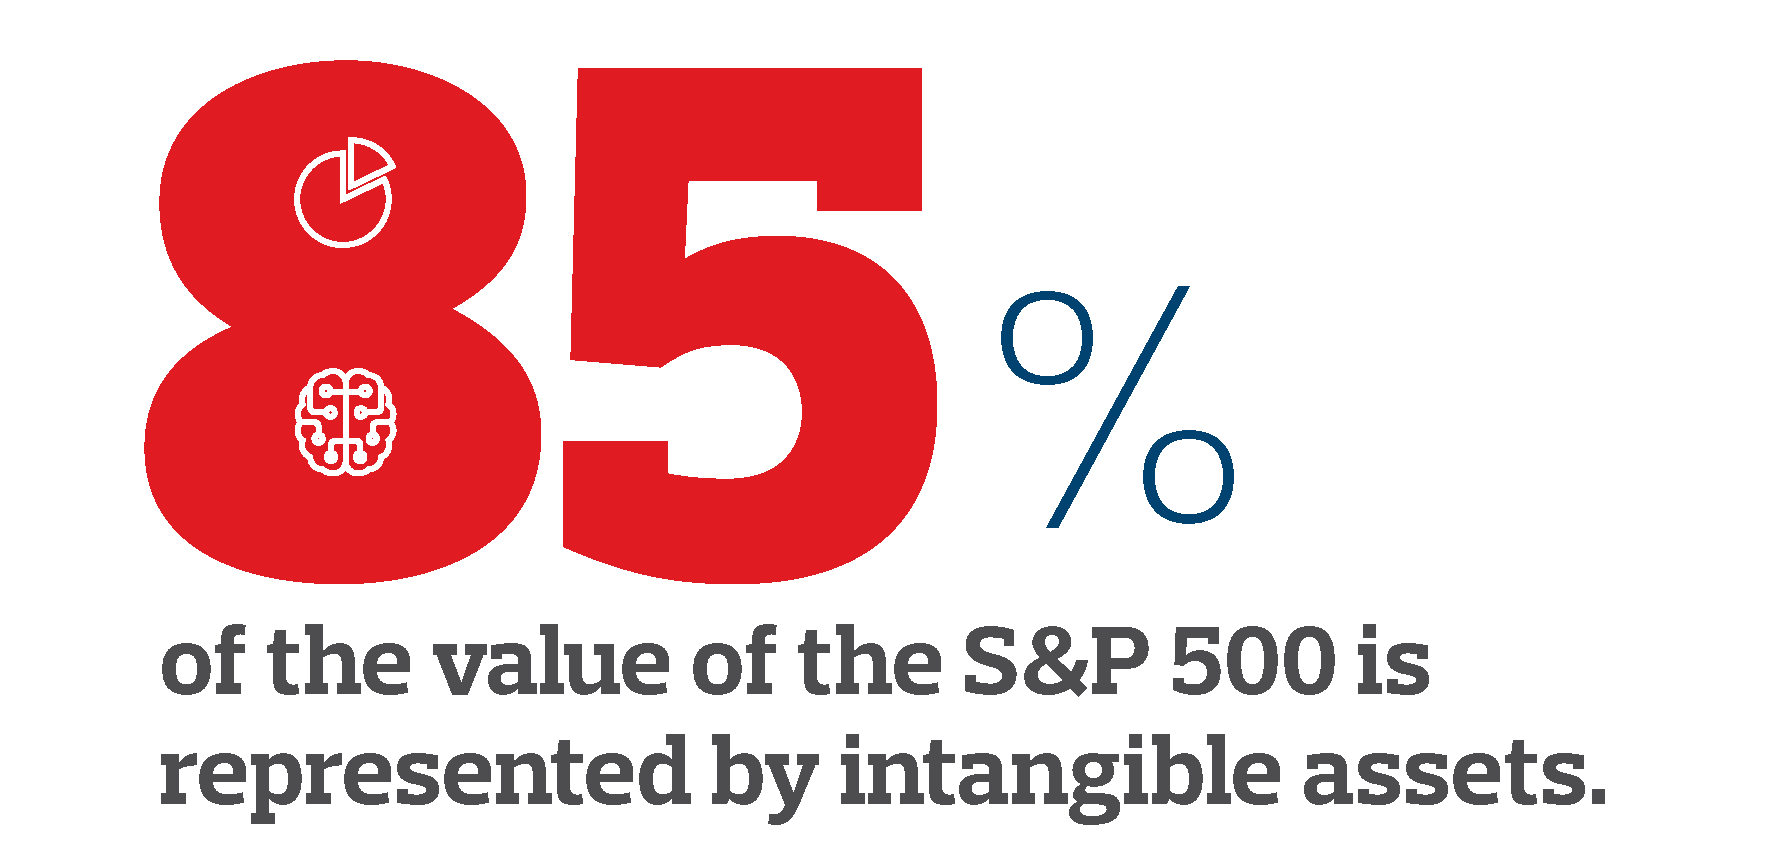 Intangible assets represents 85%